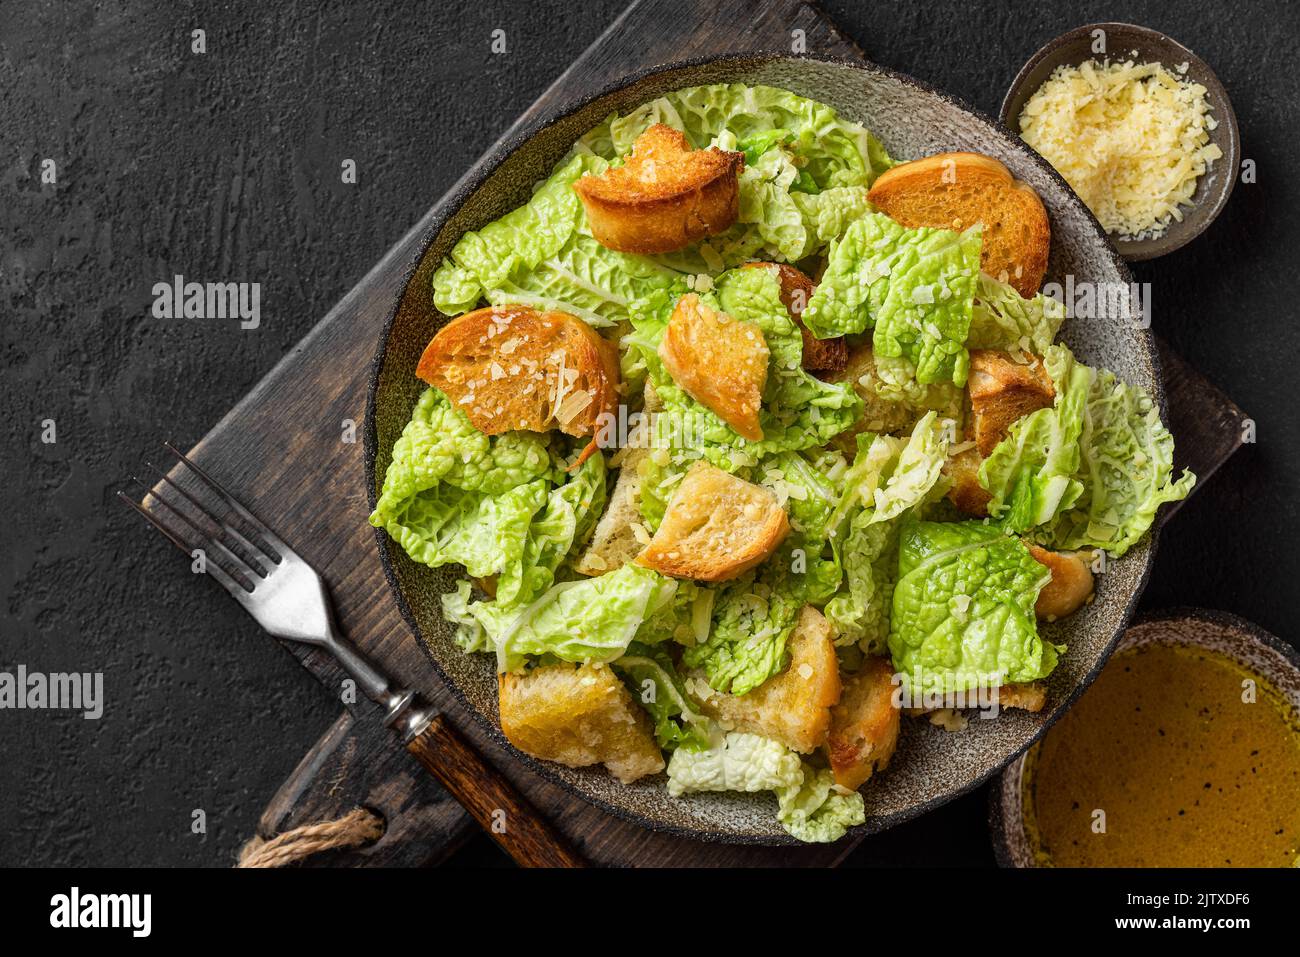 Delicious tasty food. Caesar salad with parmesan cheese and crispy croutons in a plate on black background. Top view Stock Photo